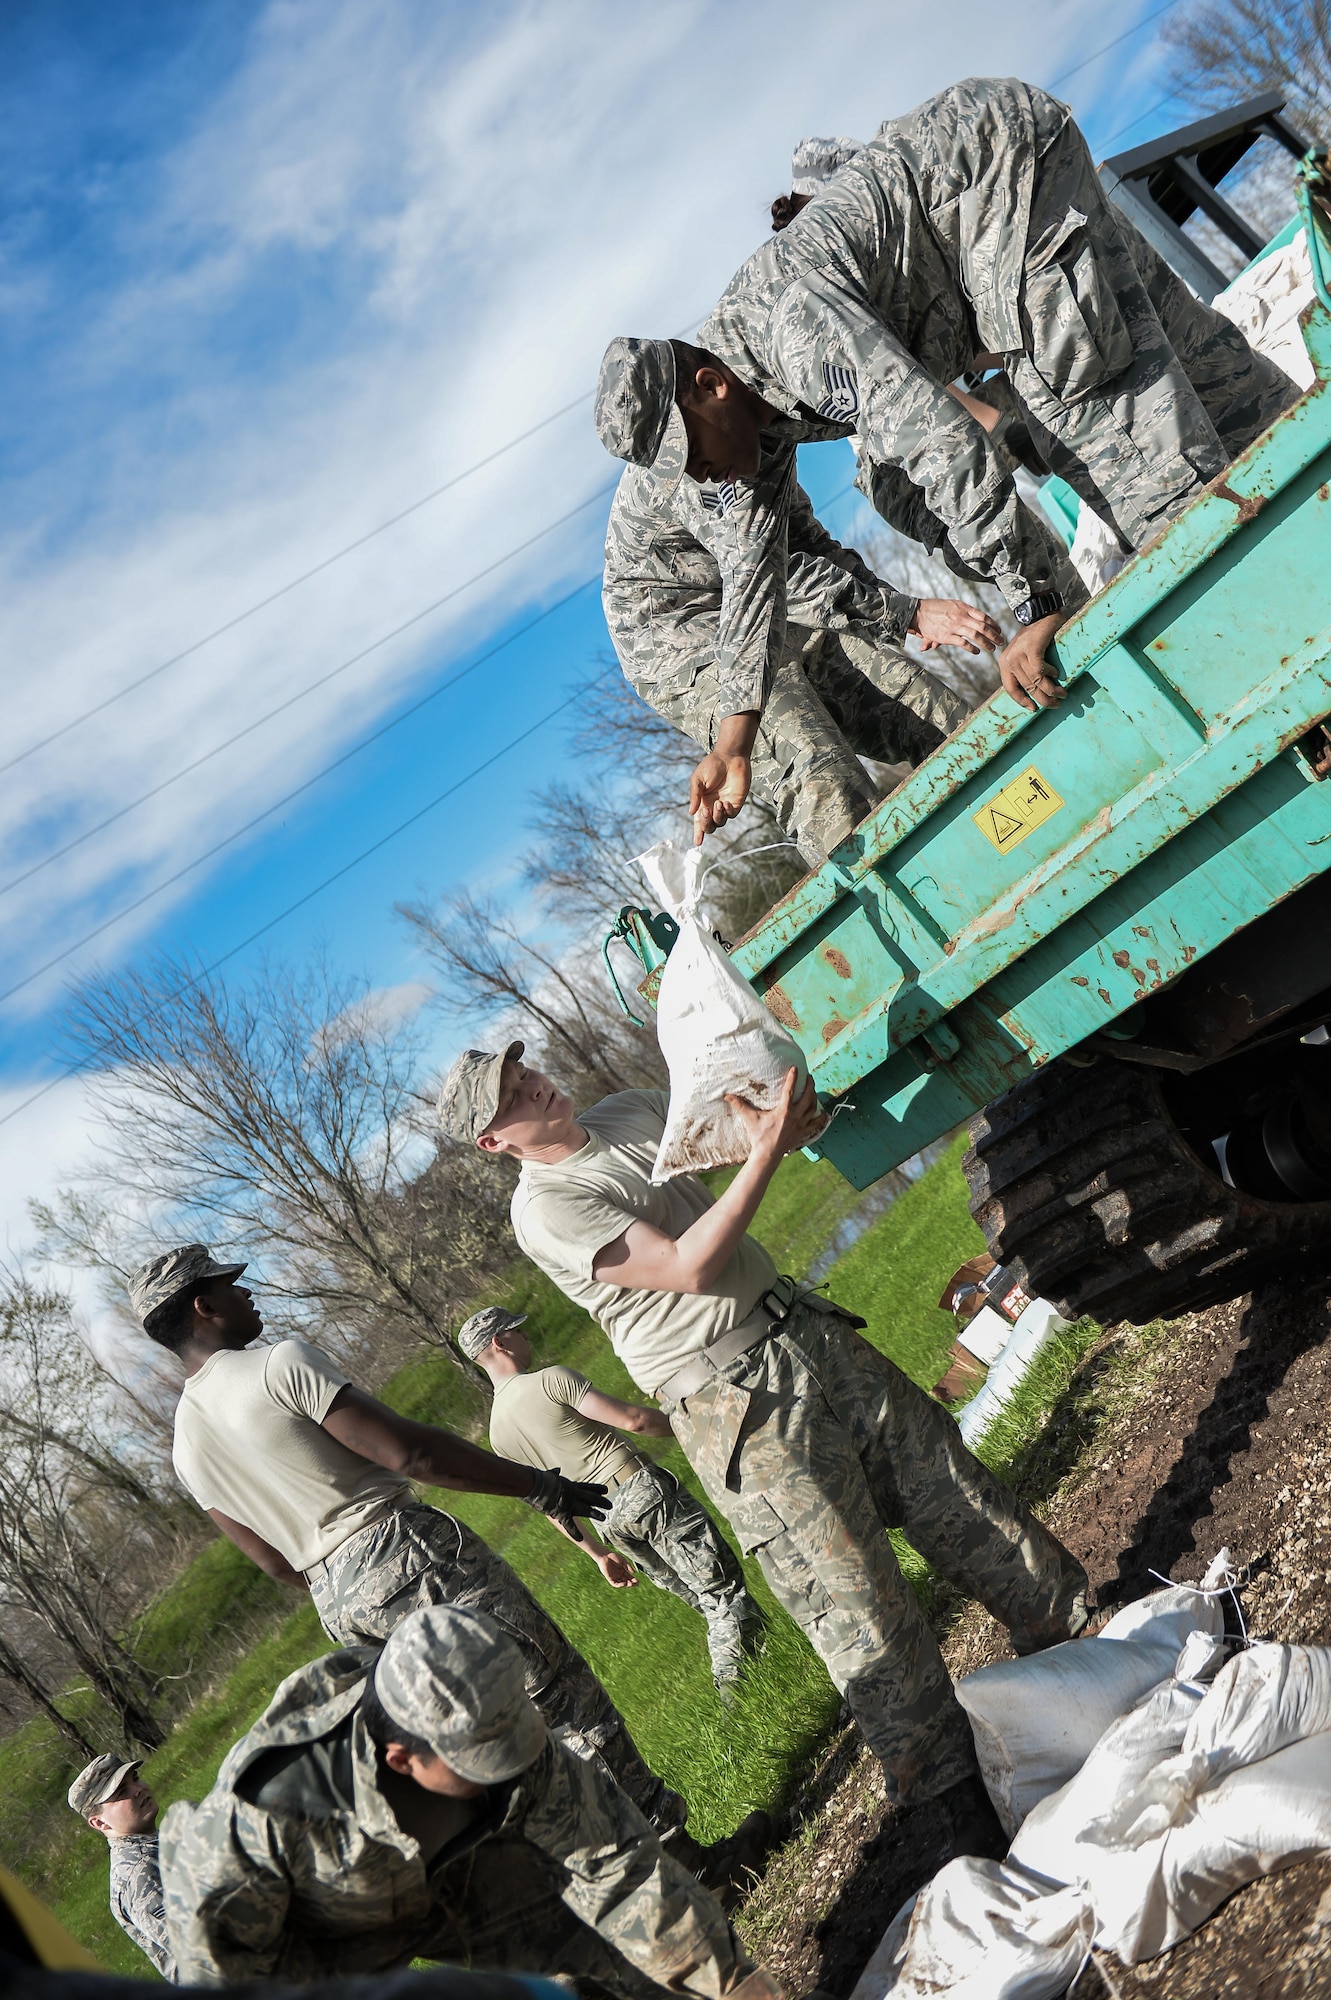 Barksdale Airmen unload sandbags in Bossier City, La., March 10, 2016. The additional manpower decreased the time needed to create the defensive barriers, reducing the changes of damage to the Red Chute Bayou levee.  (U.S. Air Force photo/Senior Airman Mozer O. Da Cunha)